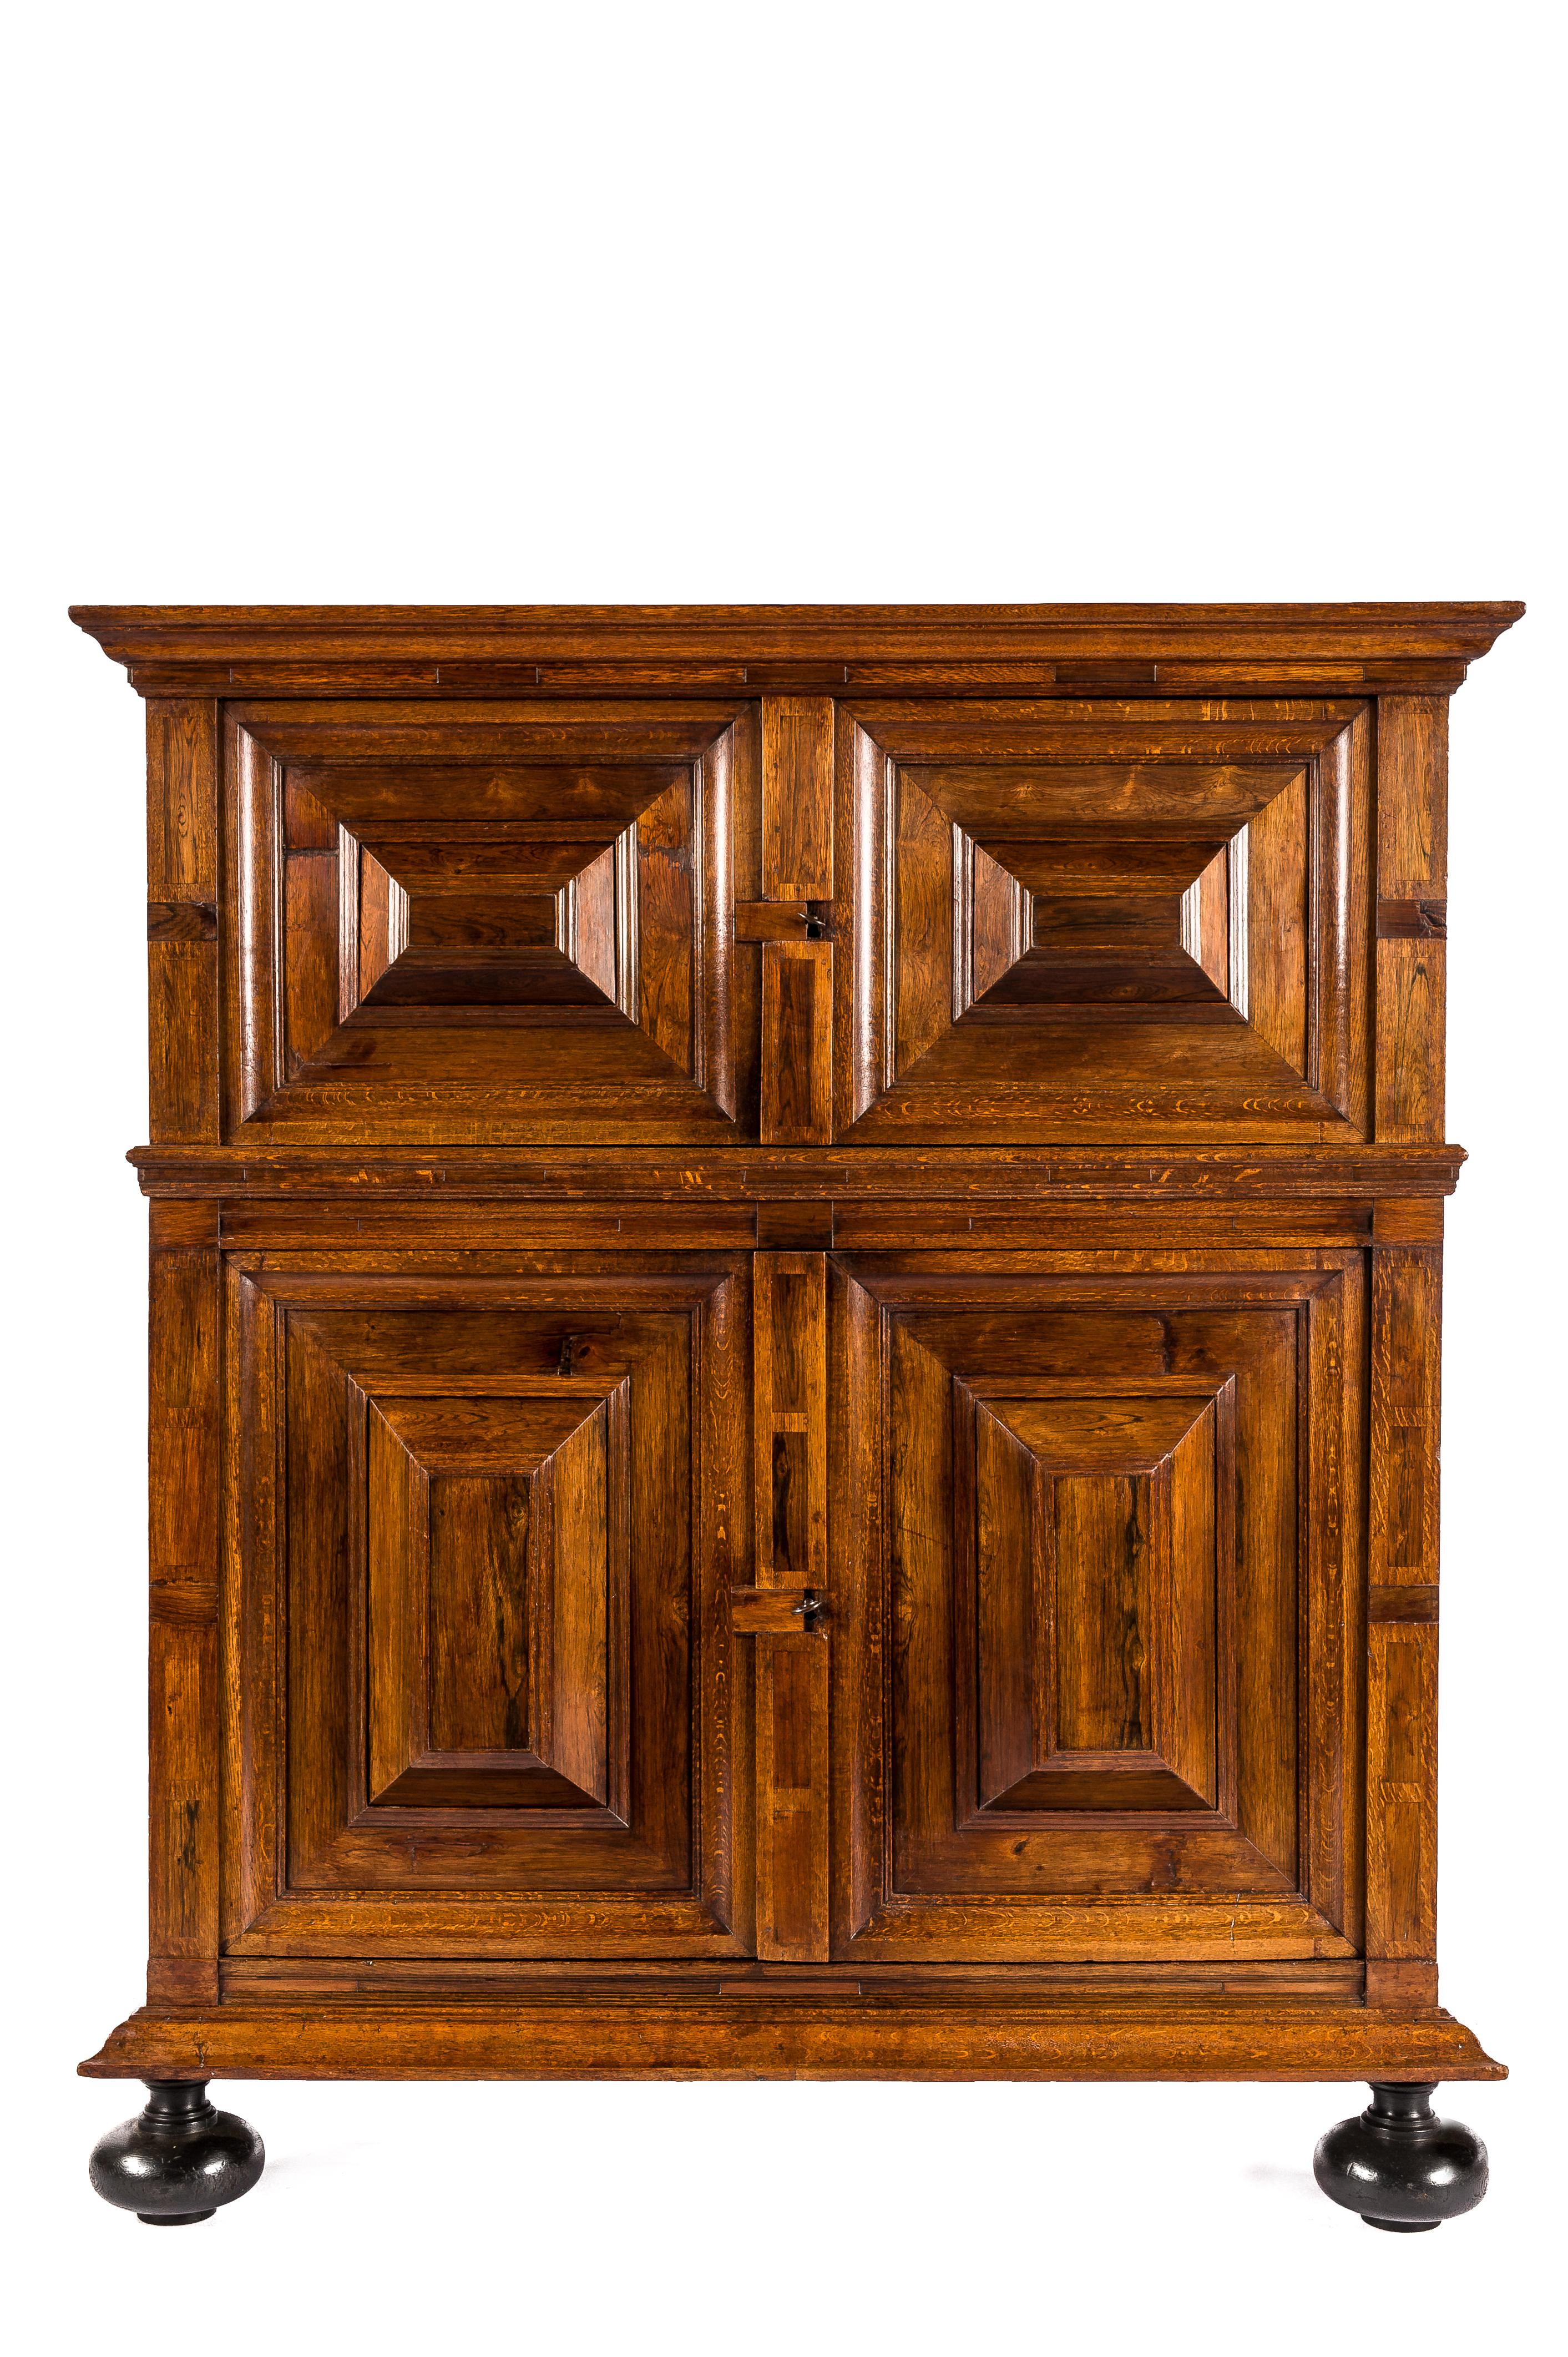 A beautiful early 18th-century four-door Renaissance cupboard in the best quality solid oak and walnut veneer. The cupboard boasts a warm honey color combined with deep gloss and a rich patina built up over 300 years. This is a  'kussenkast' or